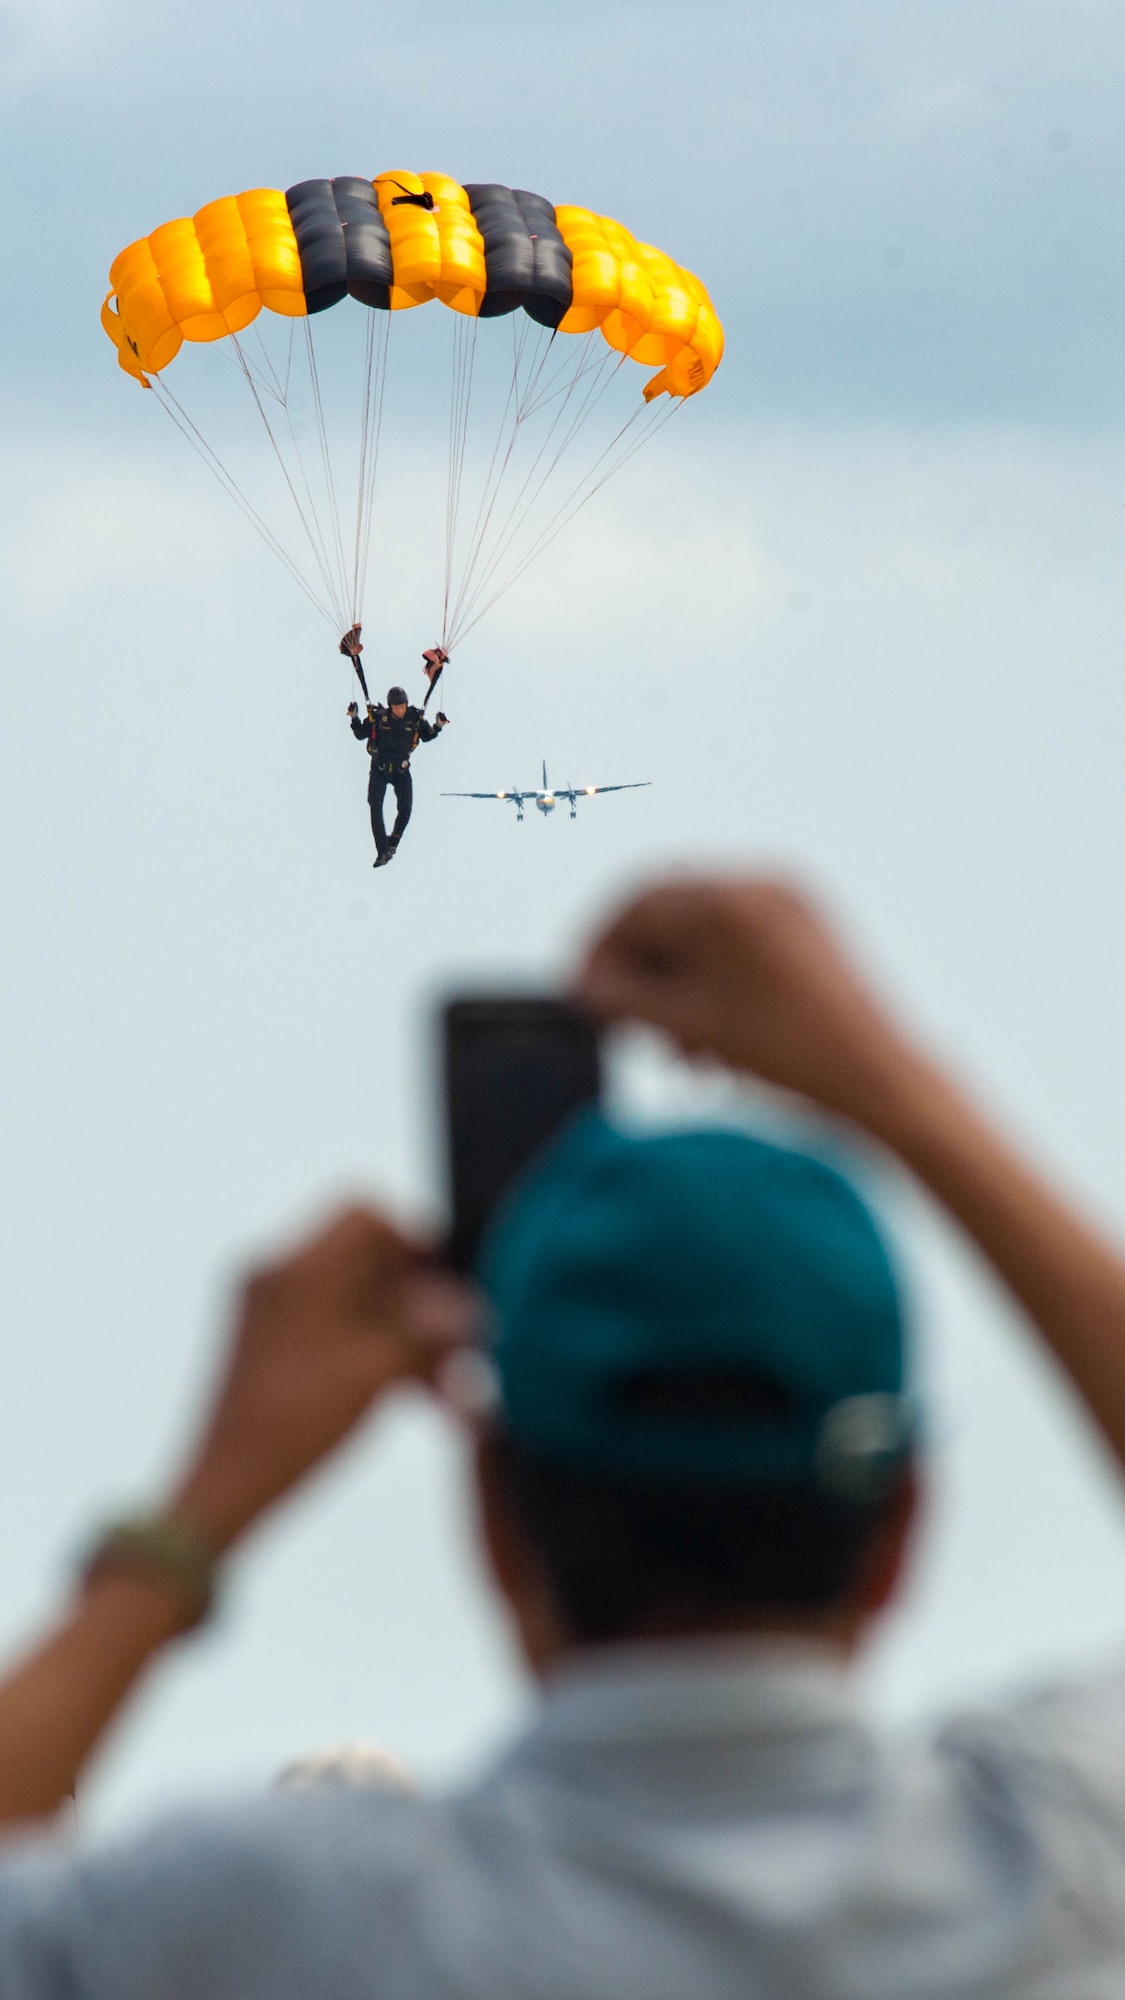 Spectators watch as a U.S. Army Golden Knights parachute team member prepares to land during the AirPower Over Hampton Roads JBLE Air and Space Expo at Joint Base Langley-Eustis, Virginia, May 20, 2018.